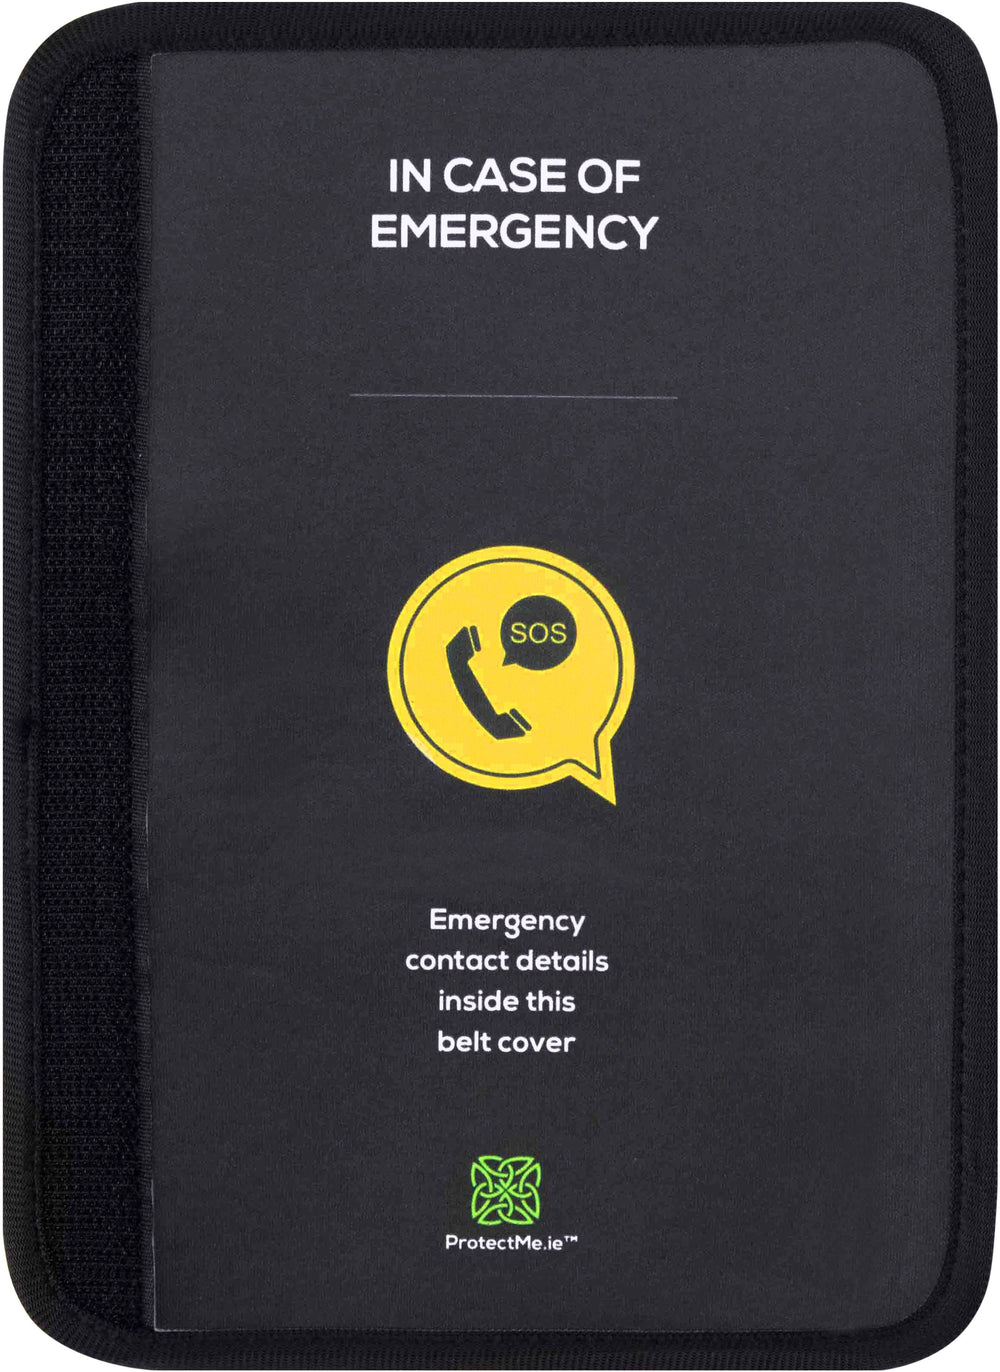 Protect Me - Seatbelt Cover - Individual In Case of Emergency (sos) - Black_1